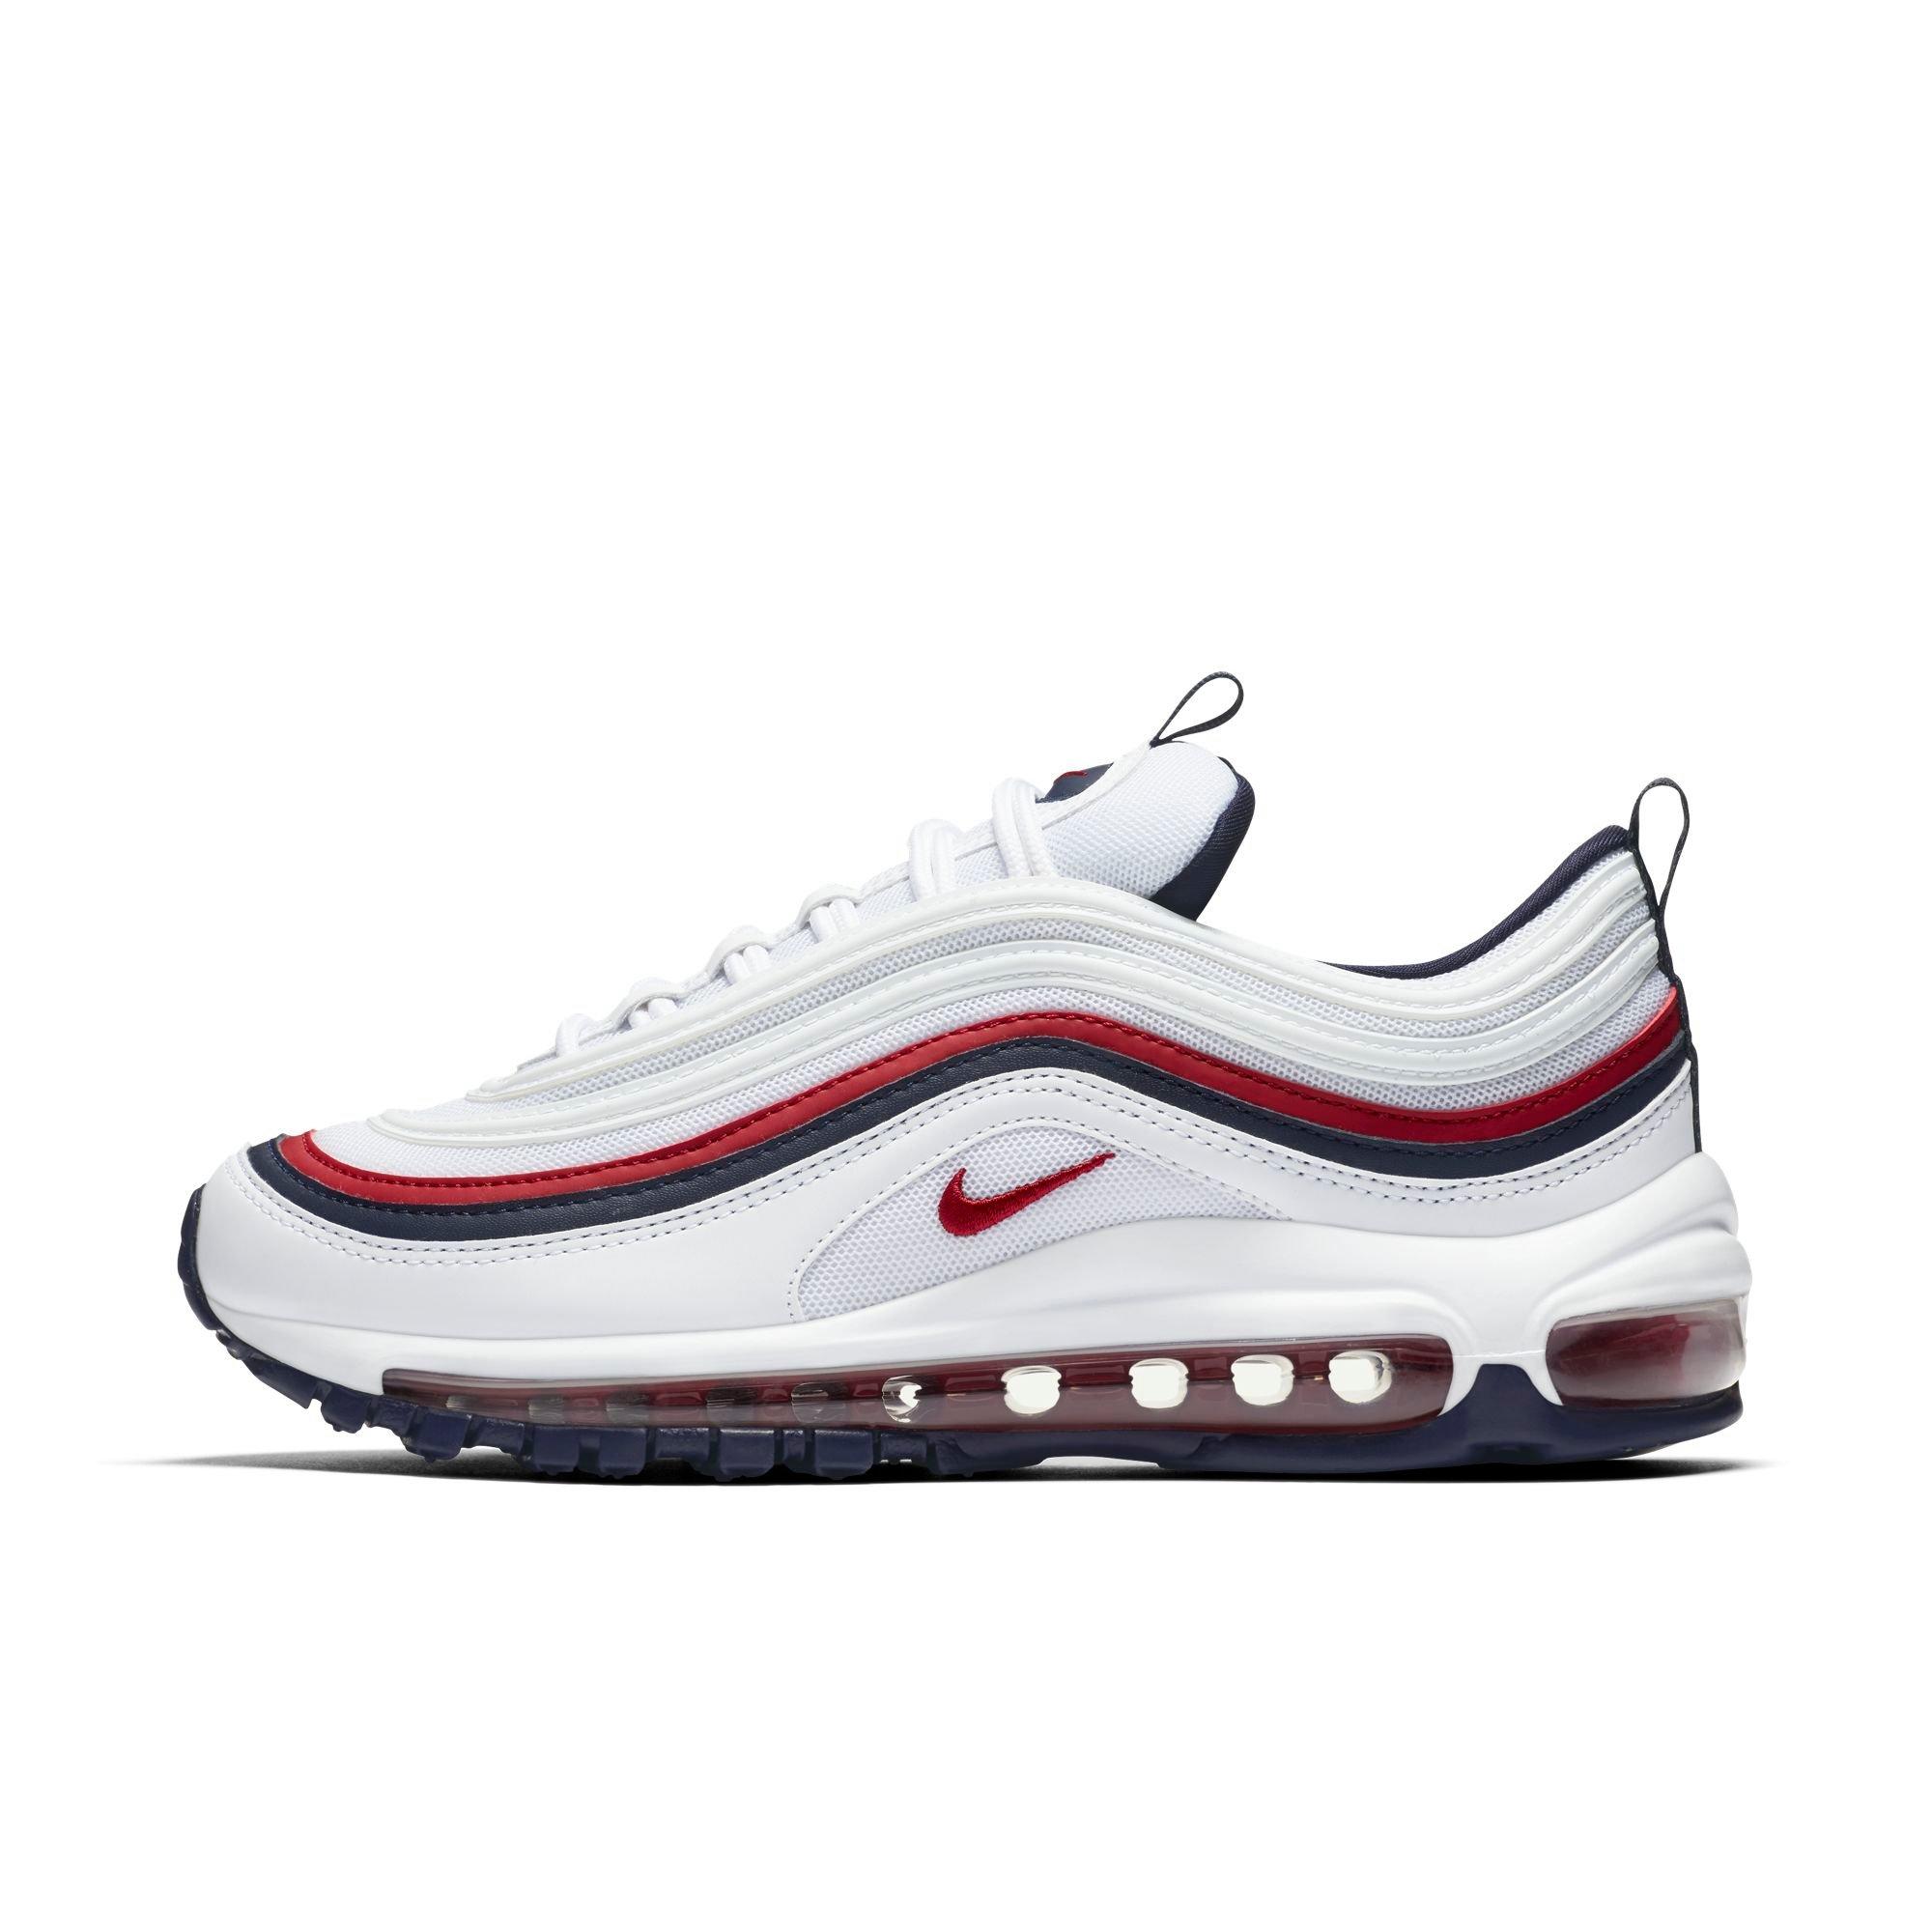 white and red 97s